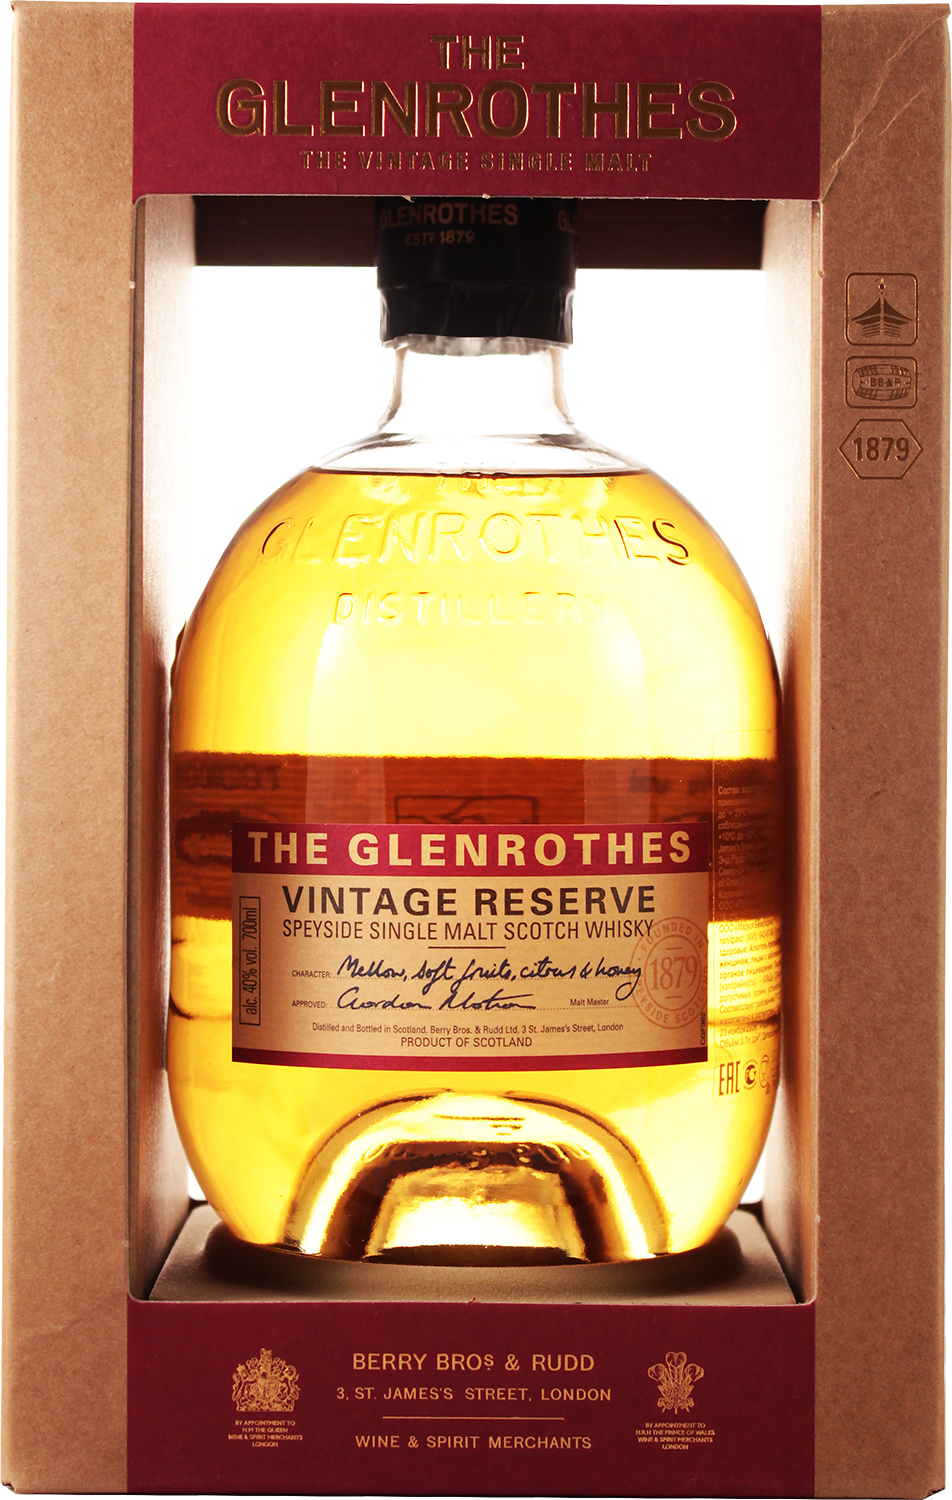 The Glenrothes Vintage Reserve Speyside Single Malt Scotch Whisky (gift box) game of thrones house tyrell clynelish reserve single malt scotch whisky gift box